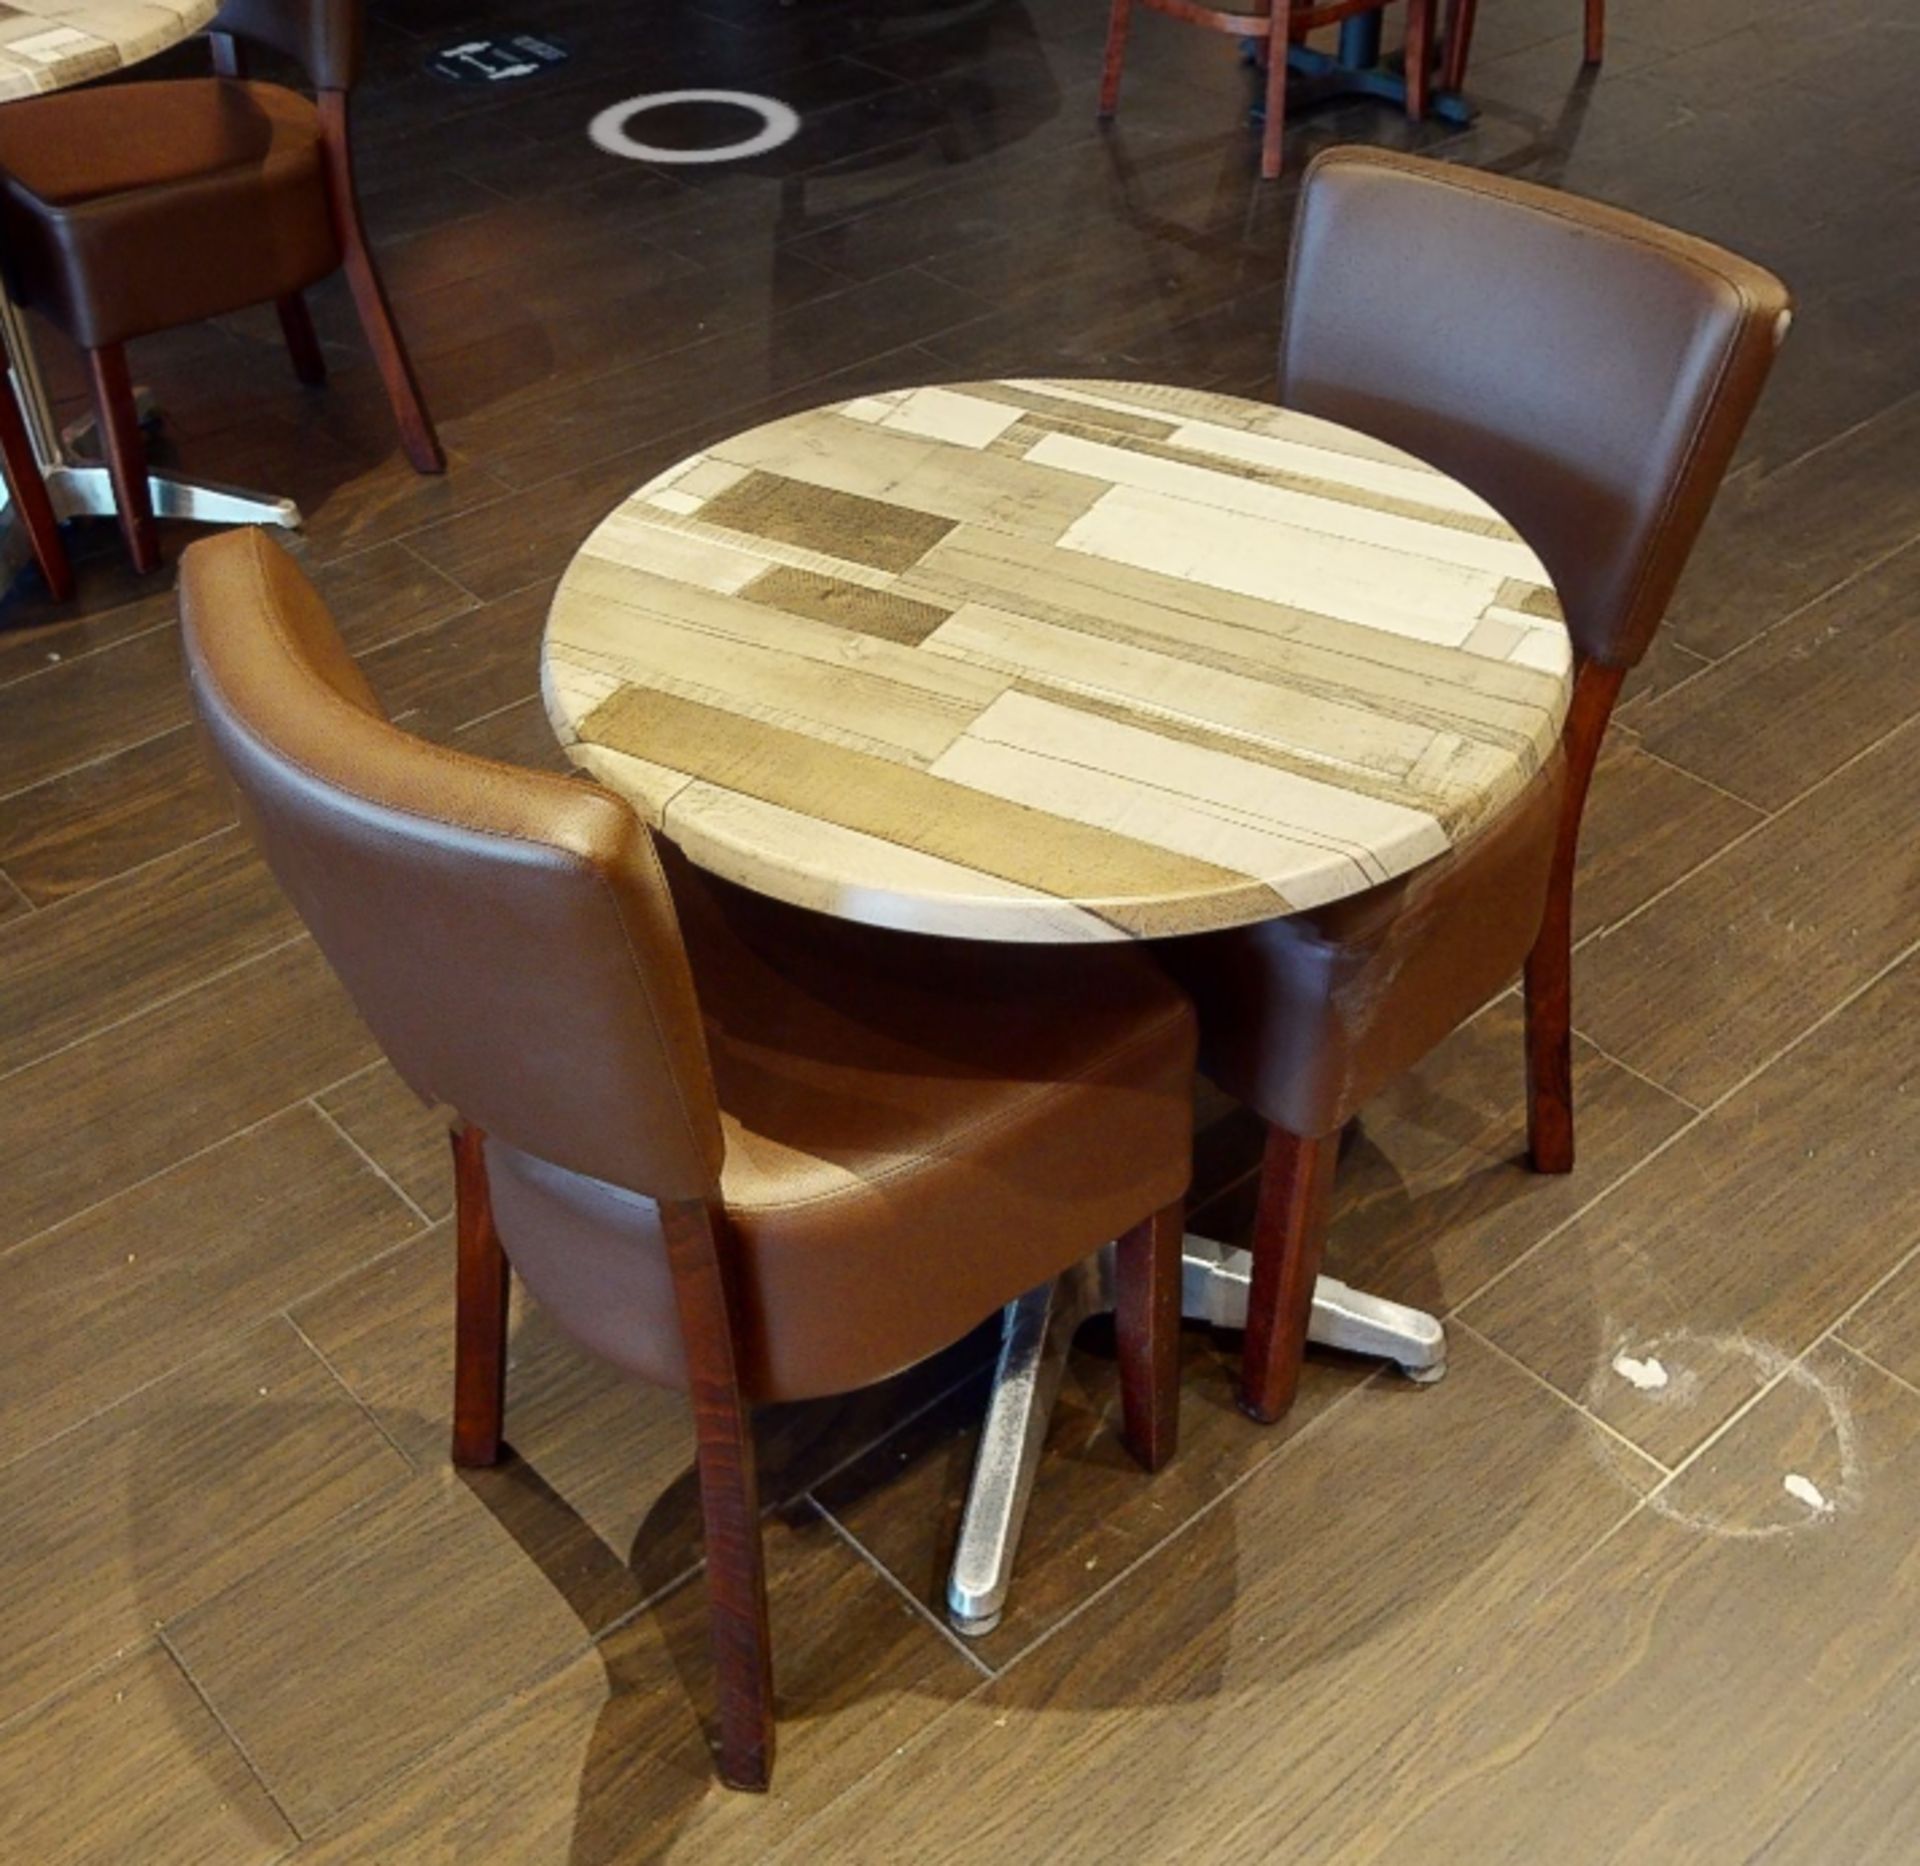 10 x Two Seater Restaurant Tables With Wood Panel Effect Tops and Chromes Bases - CL701 - - Image 4 of 9